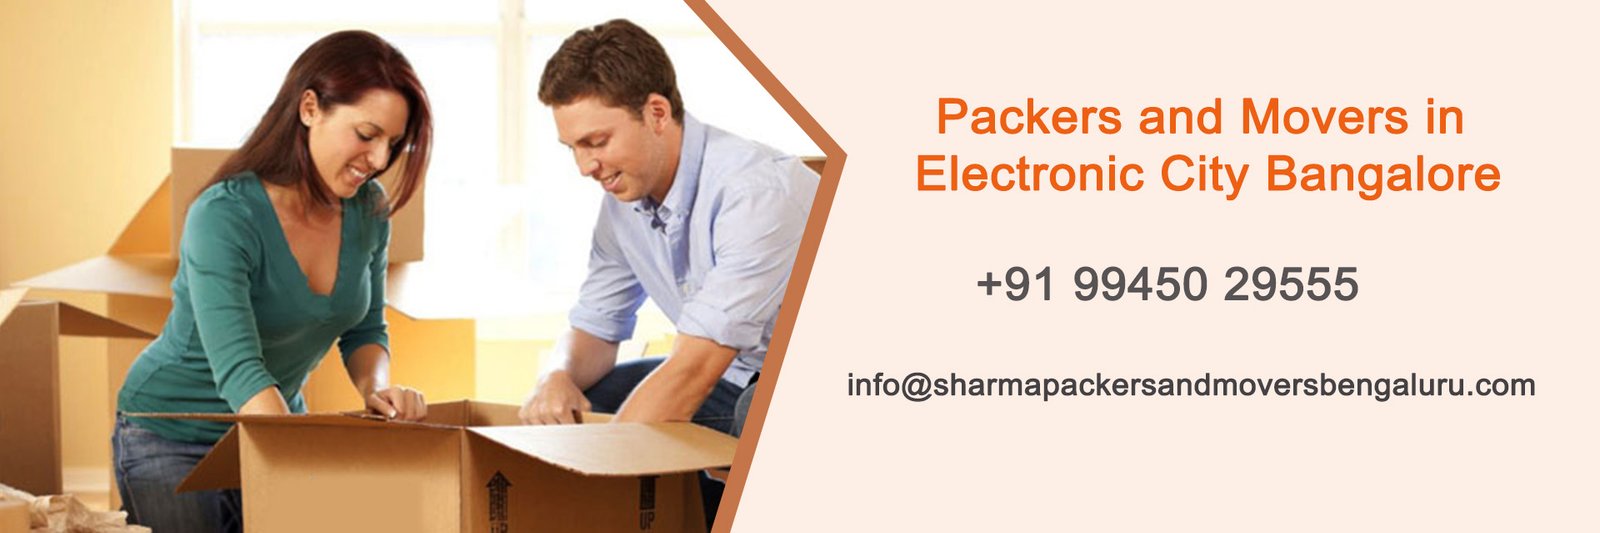 Packers and Movers in Electronic City Bangalore